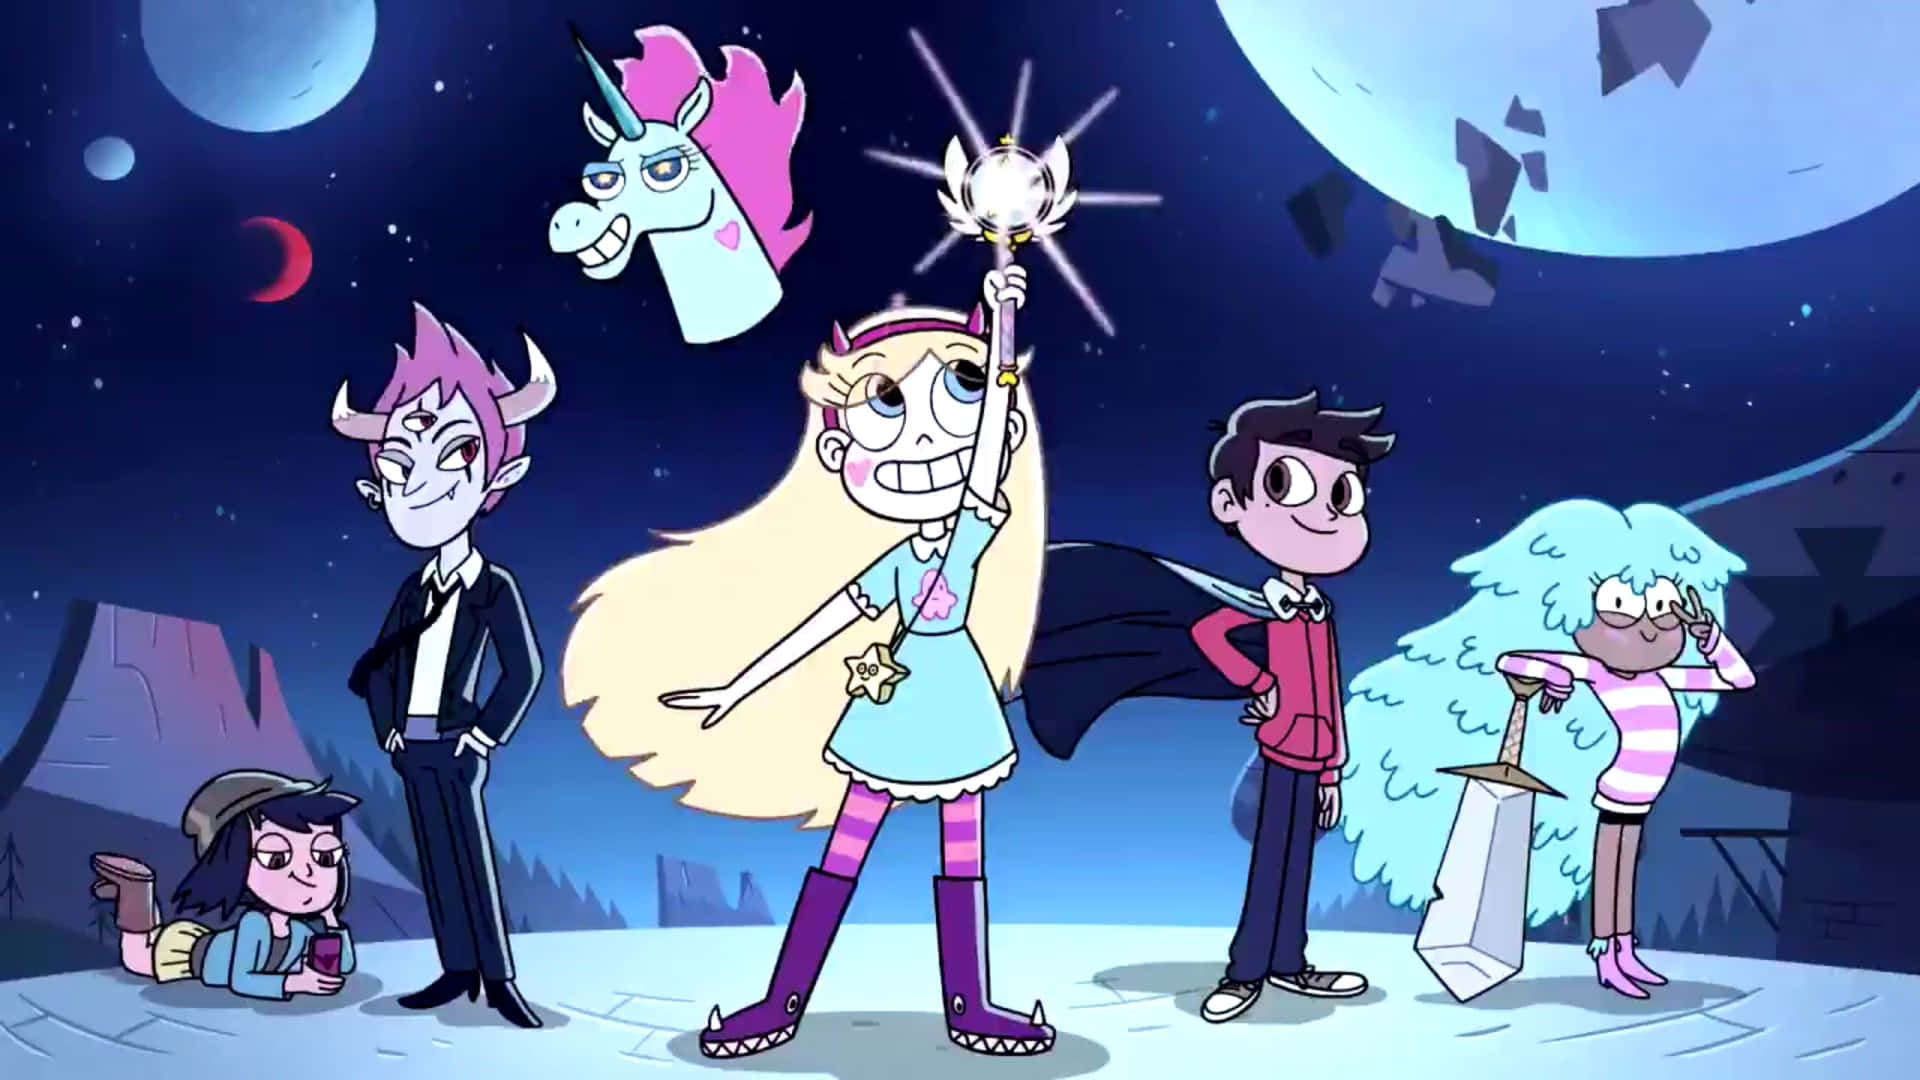 Caption: Star and Marco in an epic battle against the monsters in the magical world